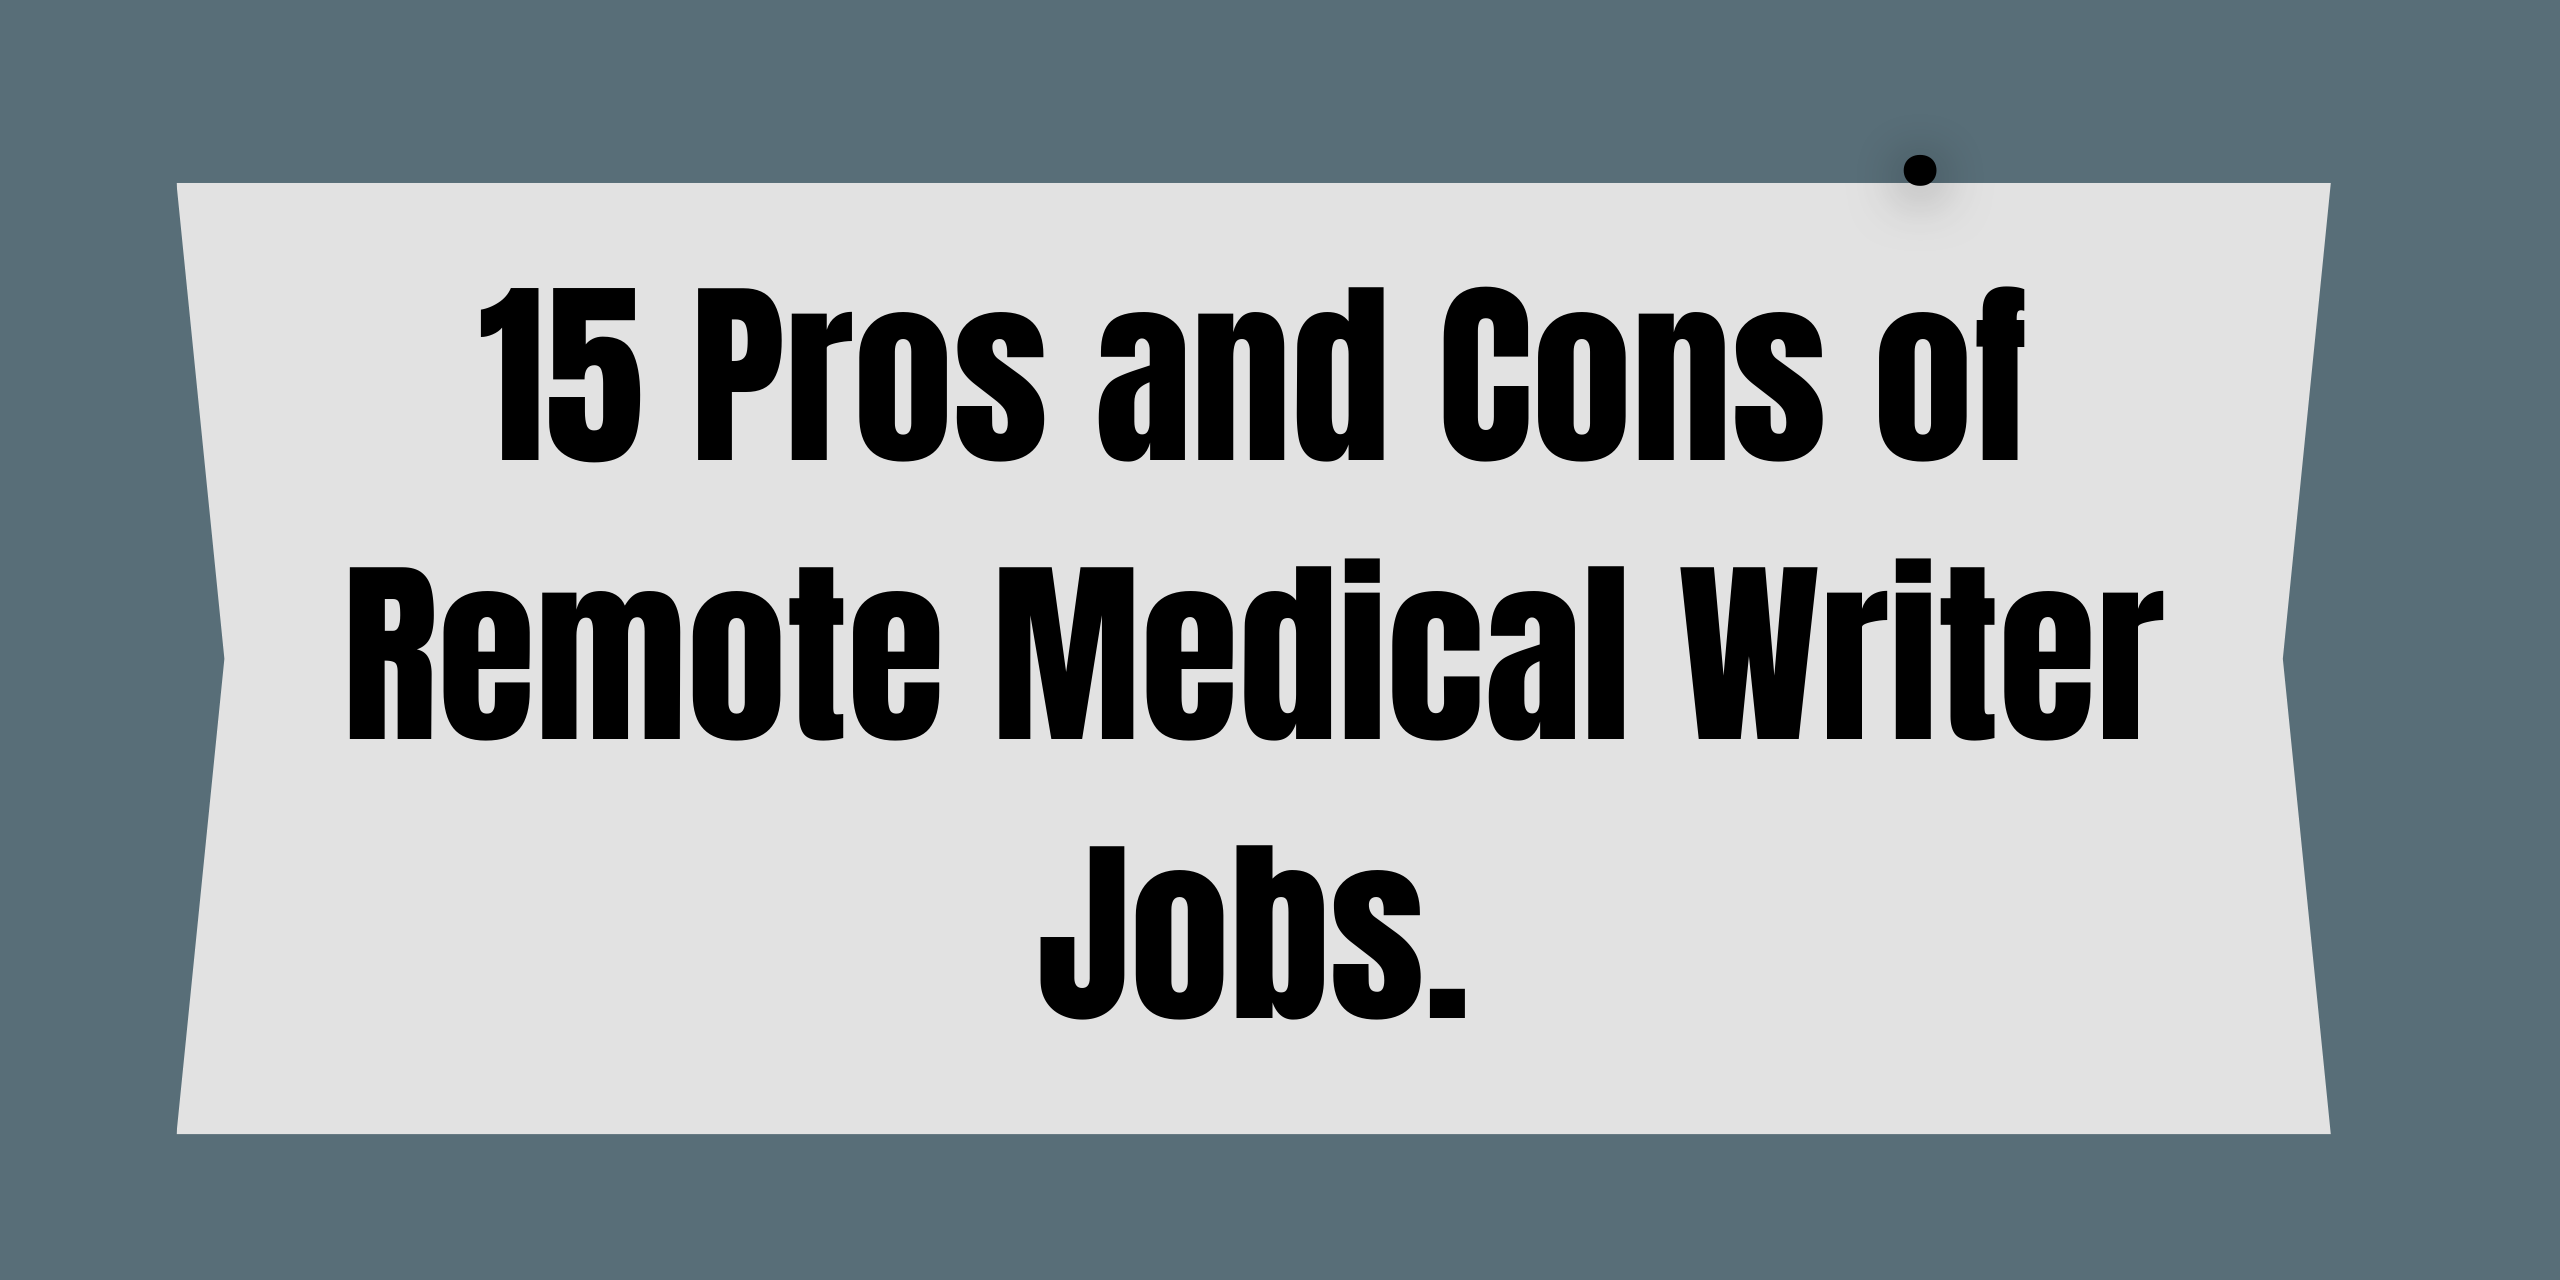 alt="15 Pros and Cons of Remote Medical Writer Jobs"